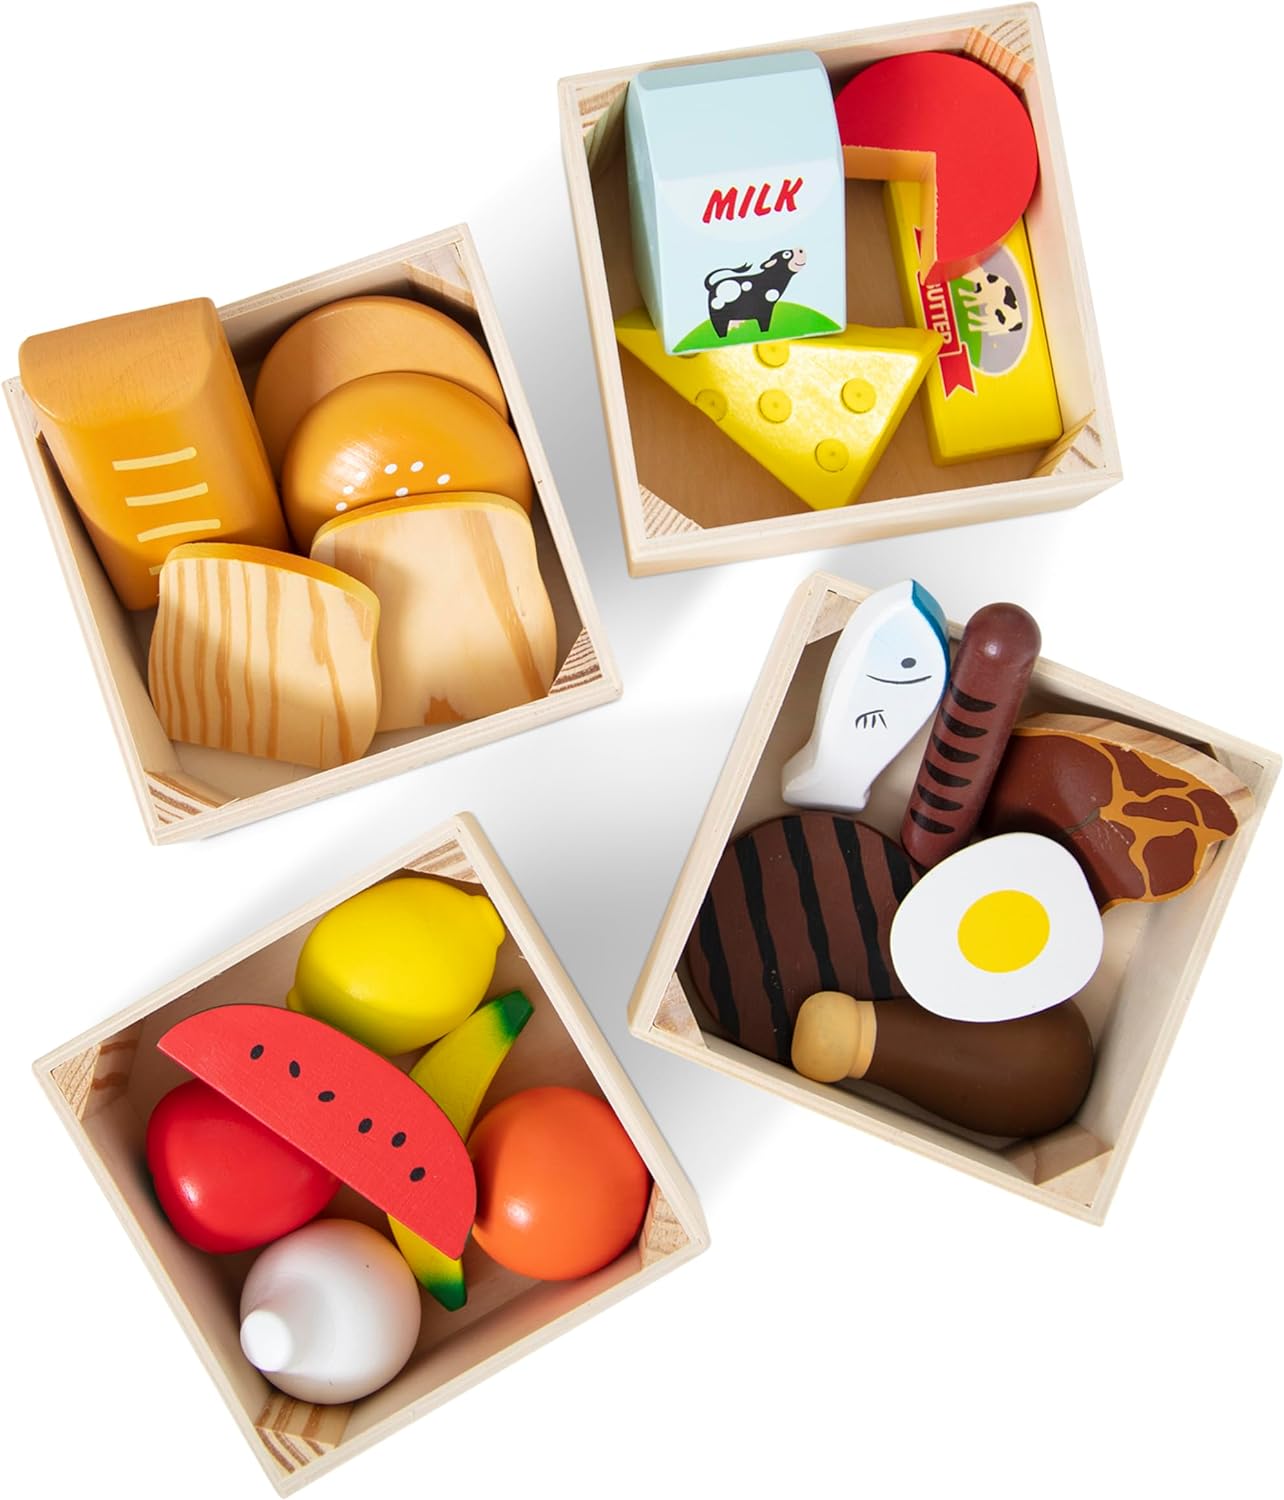 Melissa & Doug Food Groups - 21 Wooden Pieces and 4 Crates, Multi - Play Food Sets For Kids Kitchen, Pretend Food, Toy Food For Toddlers And Kids Ages 3+